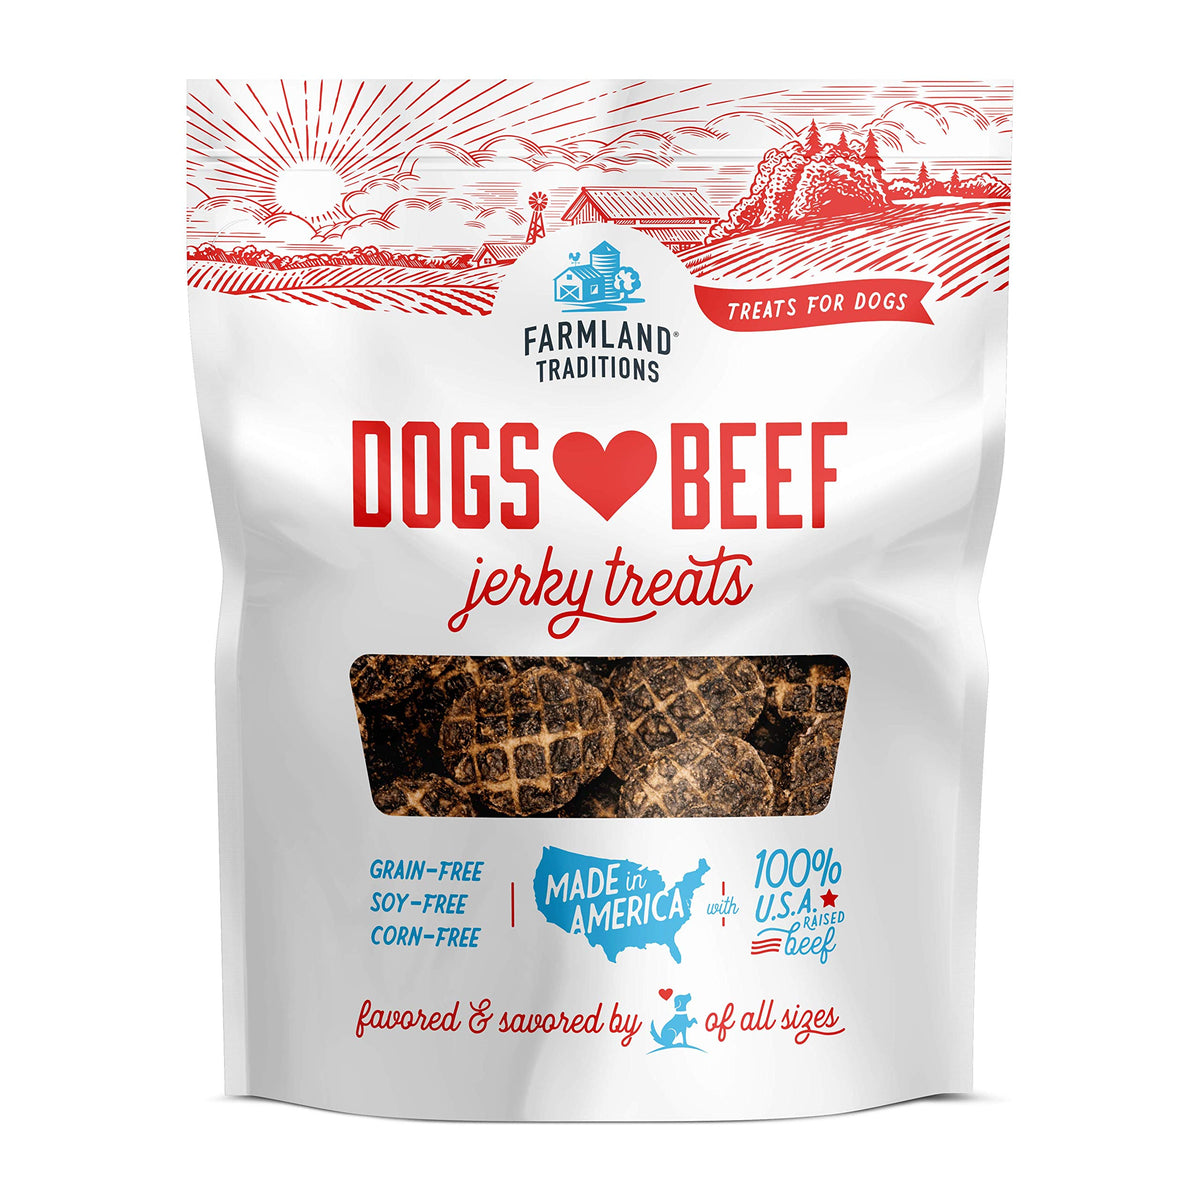 Farmland Traditions Filler Free Dogs Love Beef Premium Jerky Treats for Dogs (13.5 oz.)